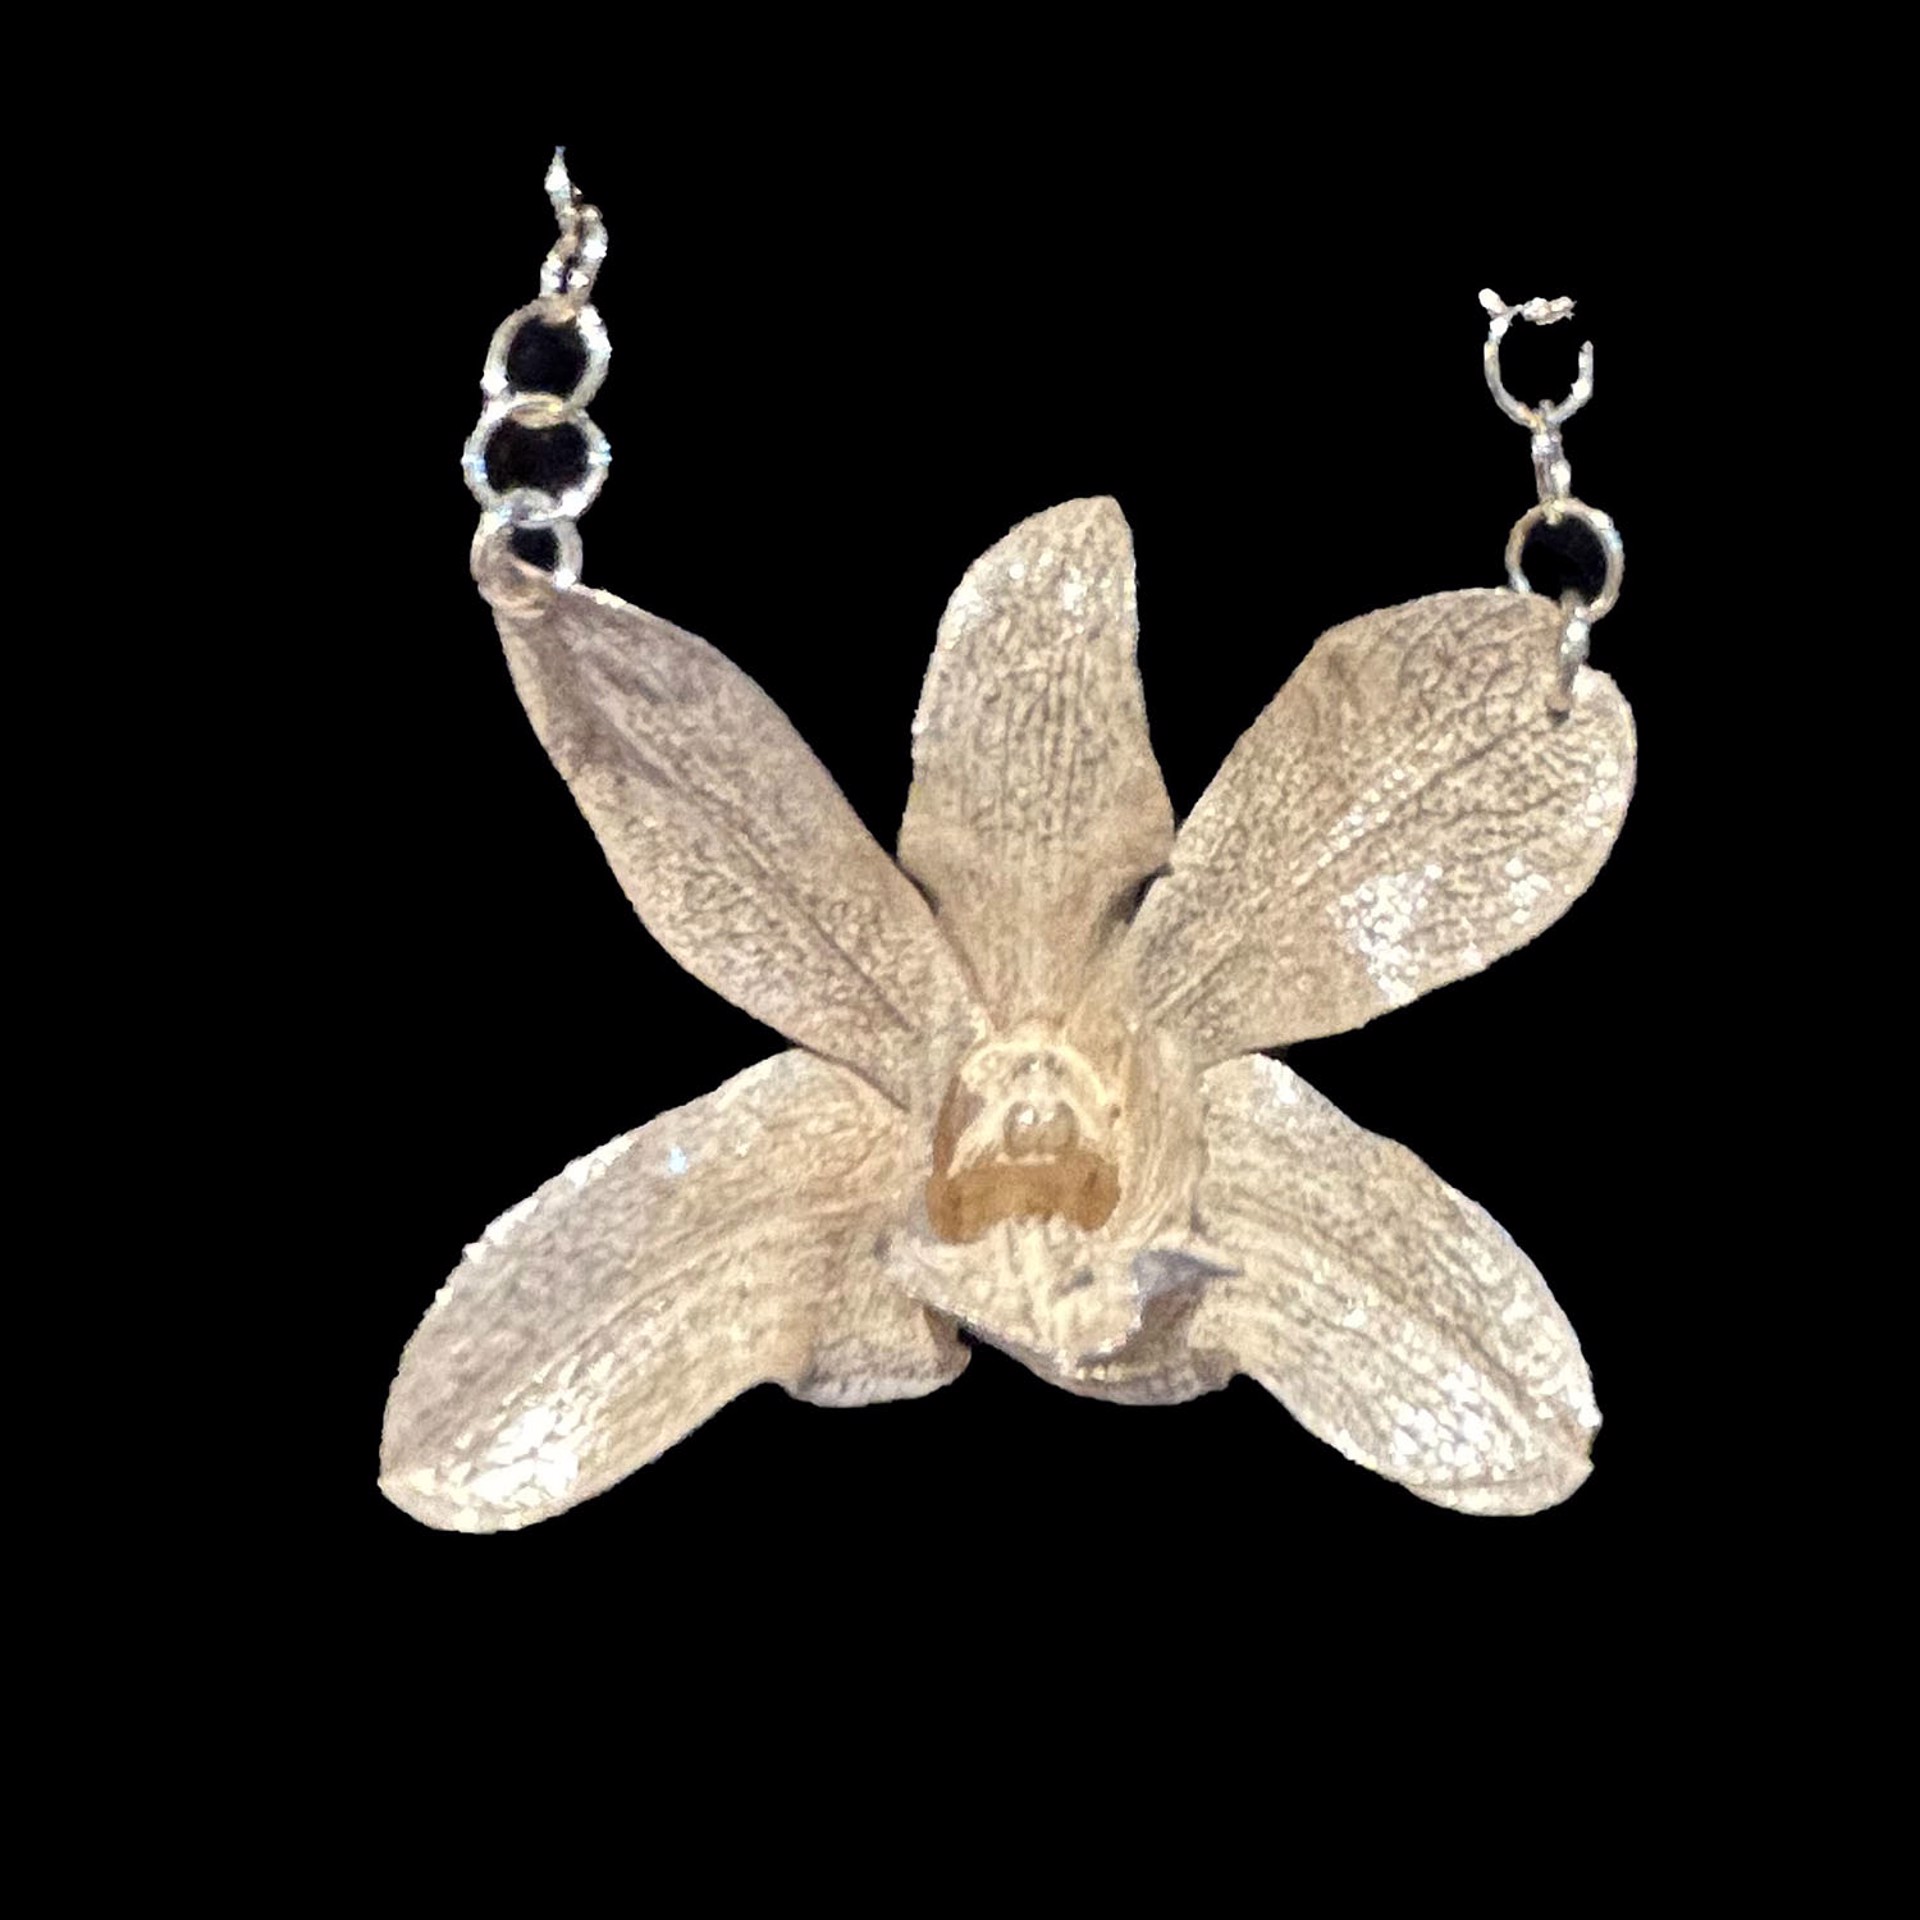 XLG Single Orchid Necklace by Wayne Keeth